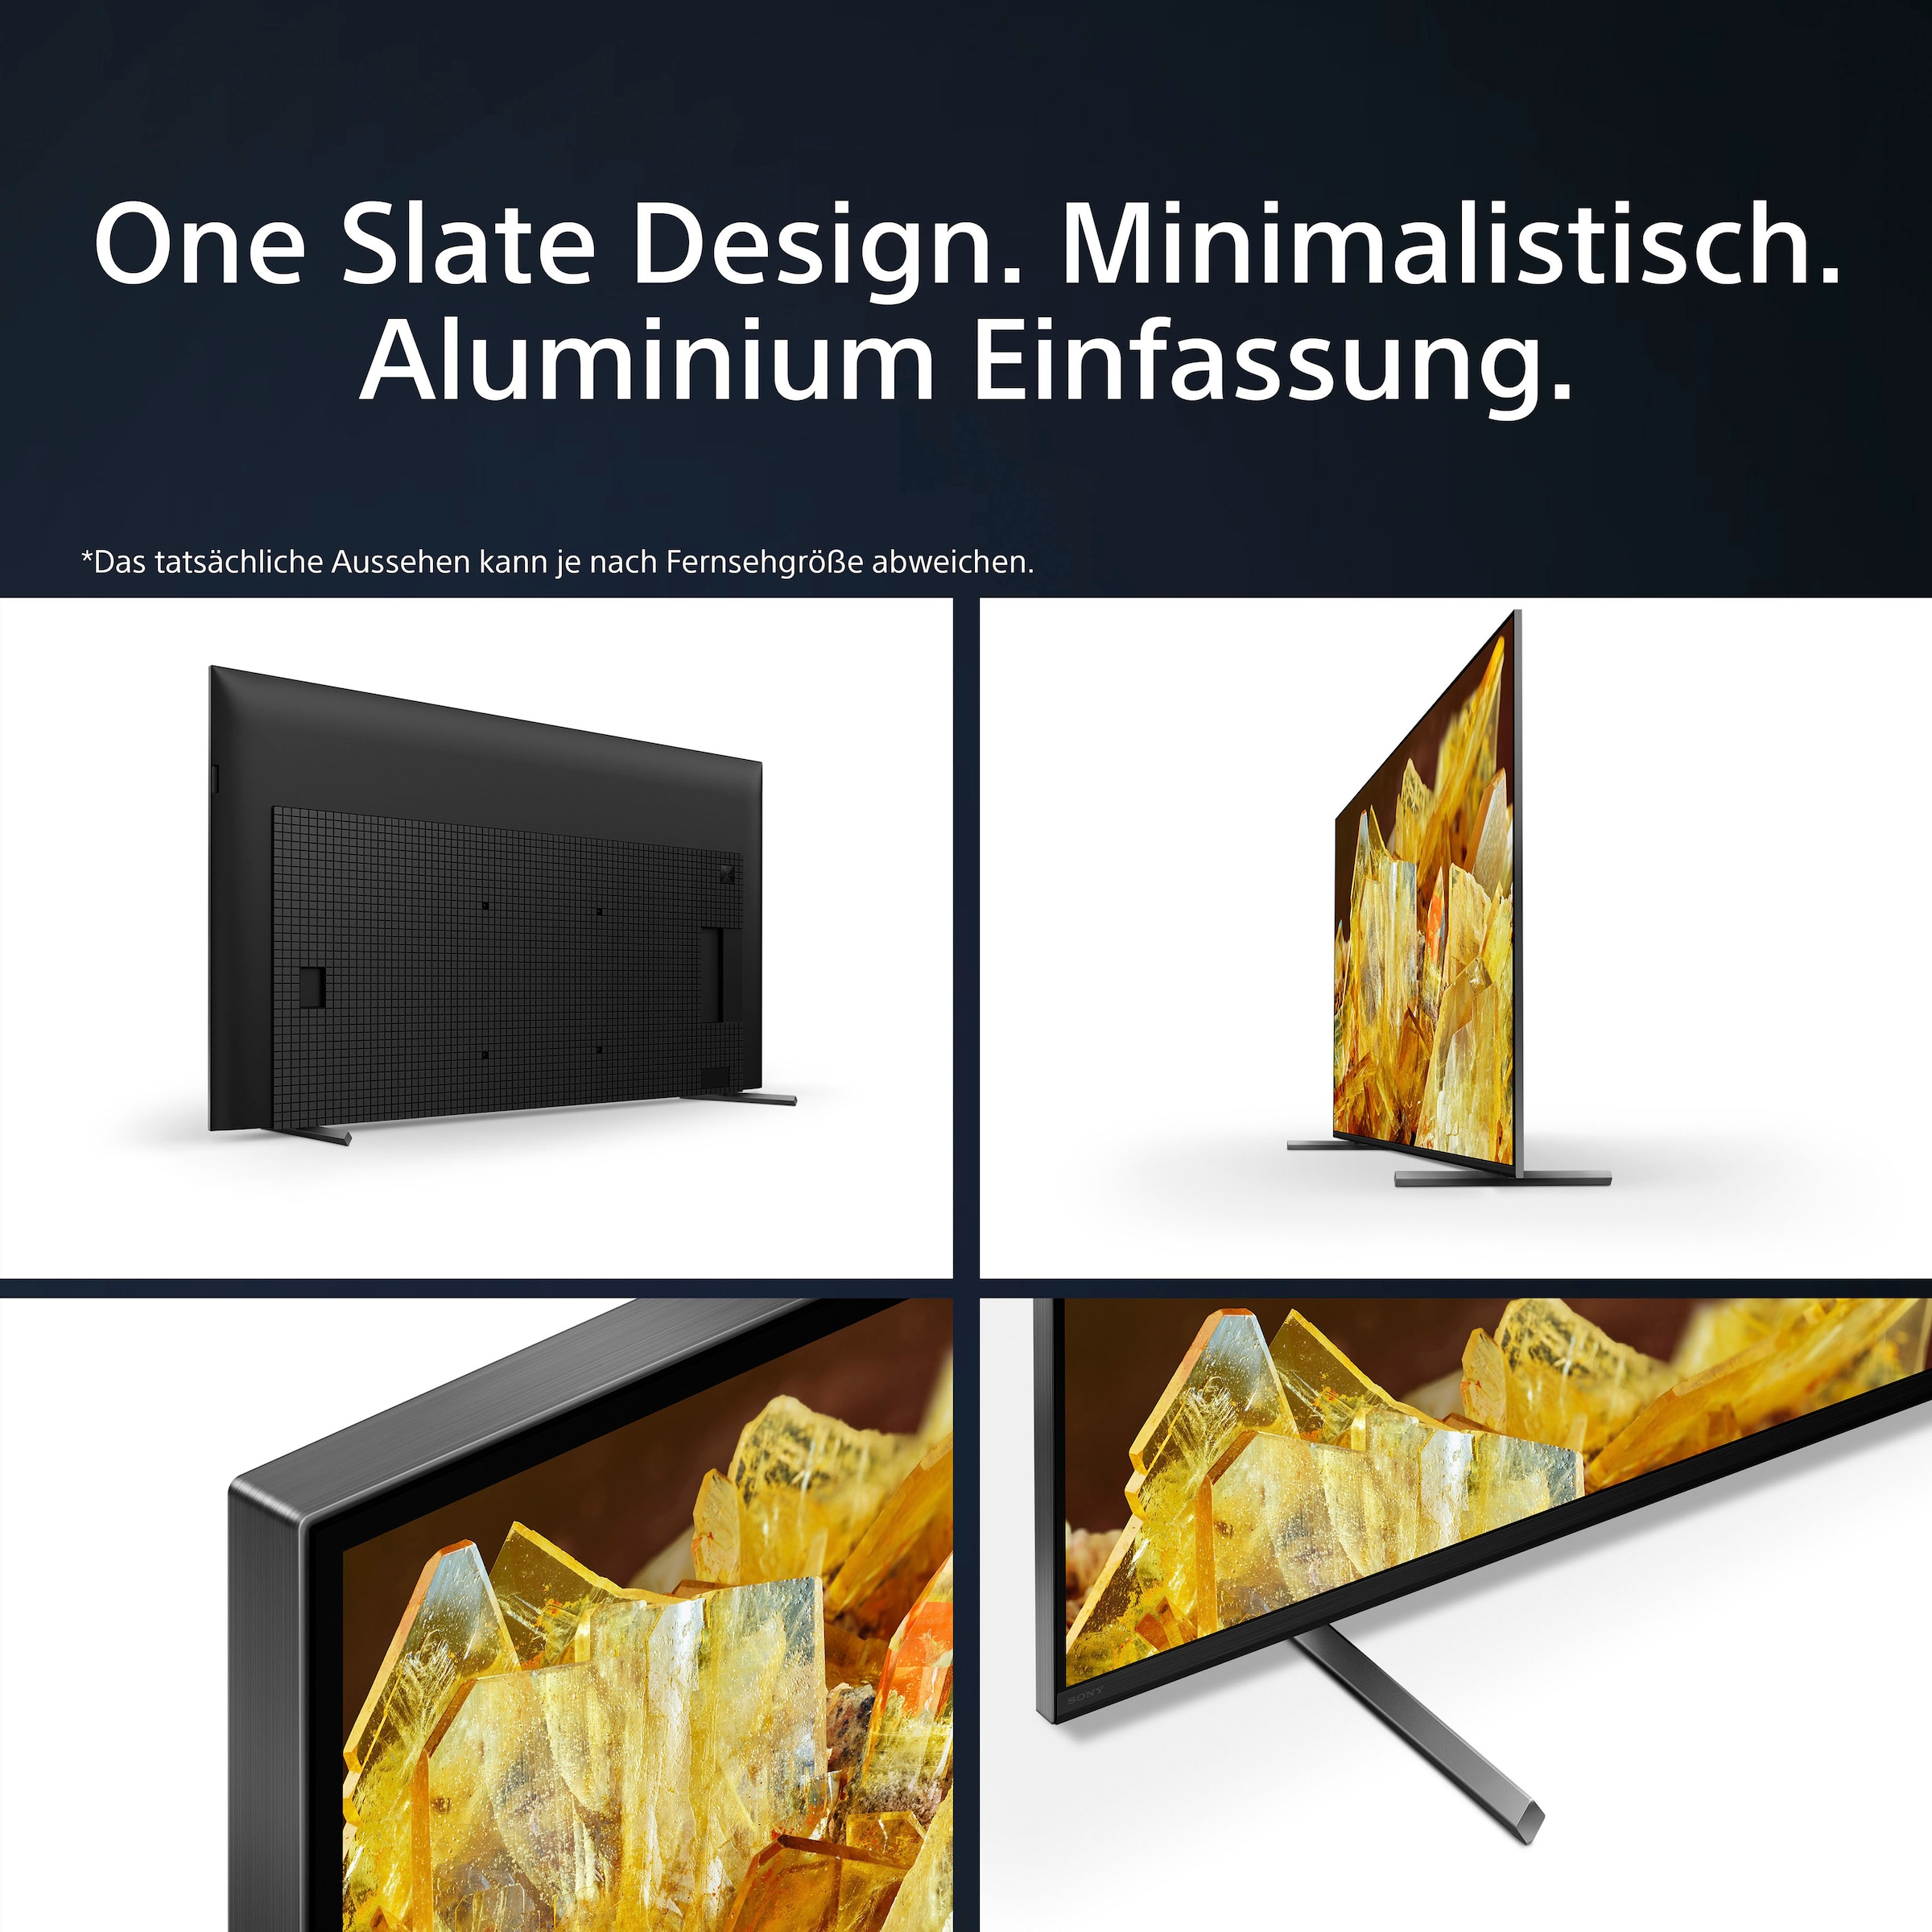 Sony LED-Fernseher, 139 cm/55 Zoll, 4K Ultra HD, Android TV-Google TV-Smart-TV, TRILUMINOS PRO, BRAVIA CORE, mit exklusiven PS5-Features